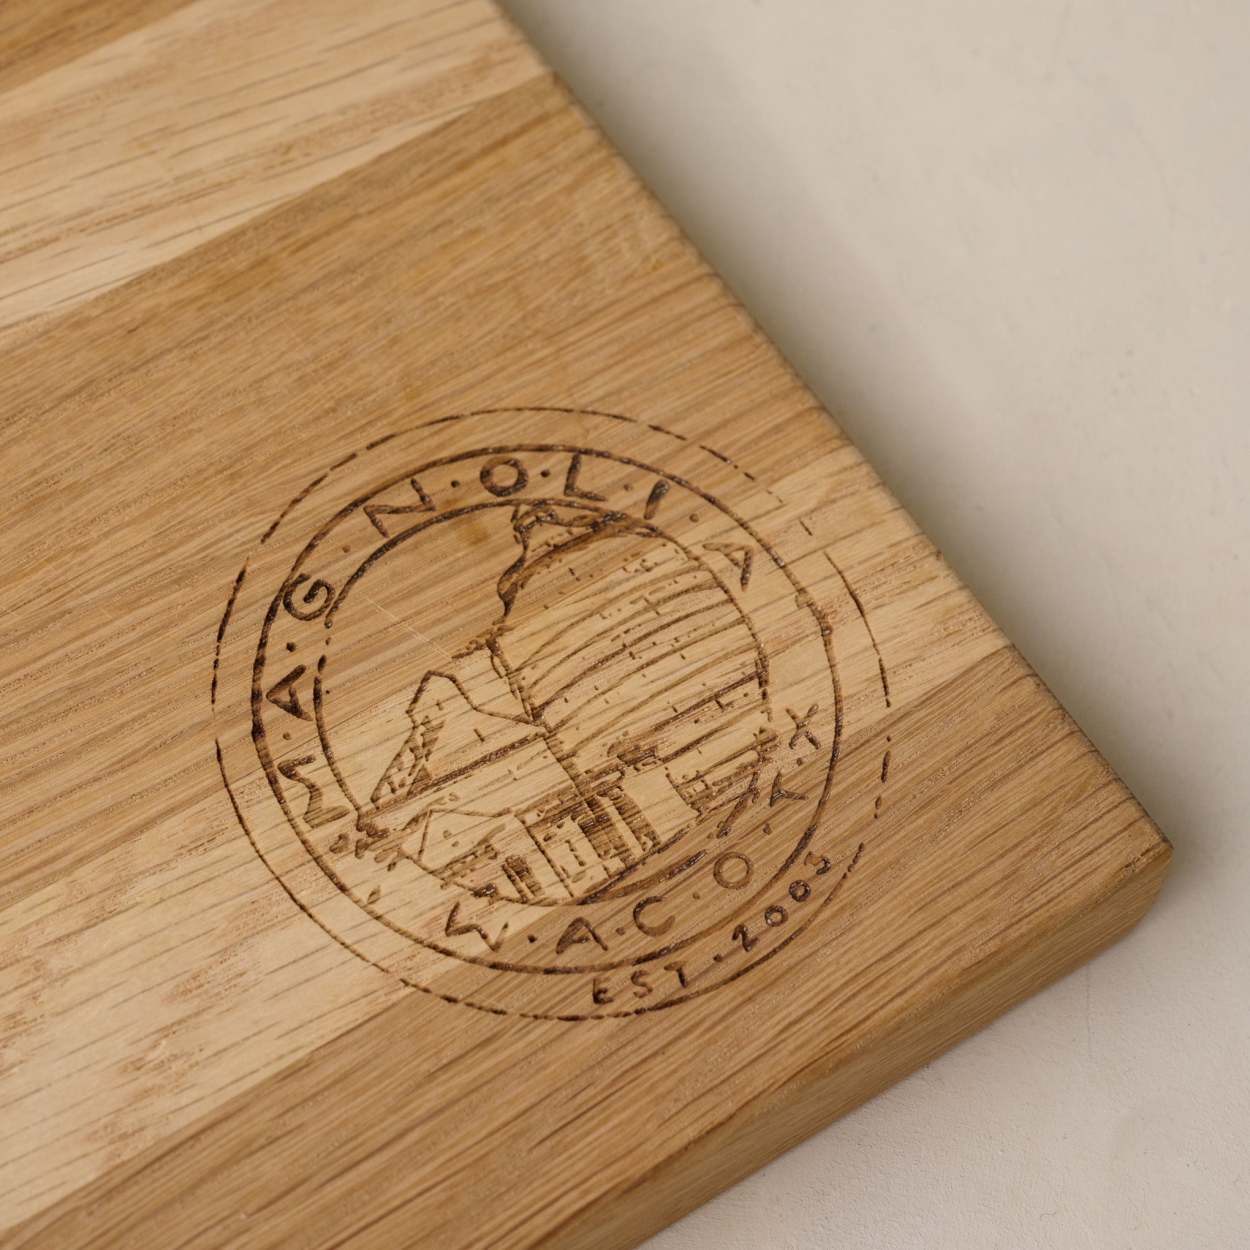  Believe Engraved Cutting Board - A Cut Above the Rest!